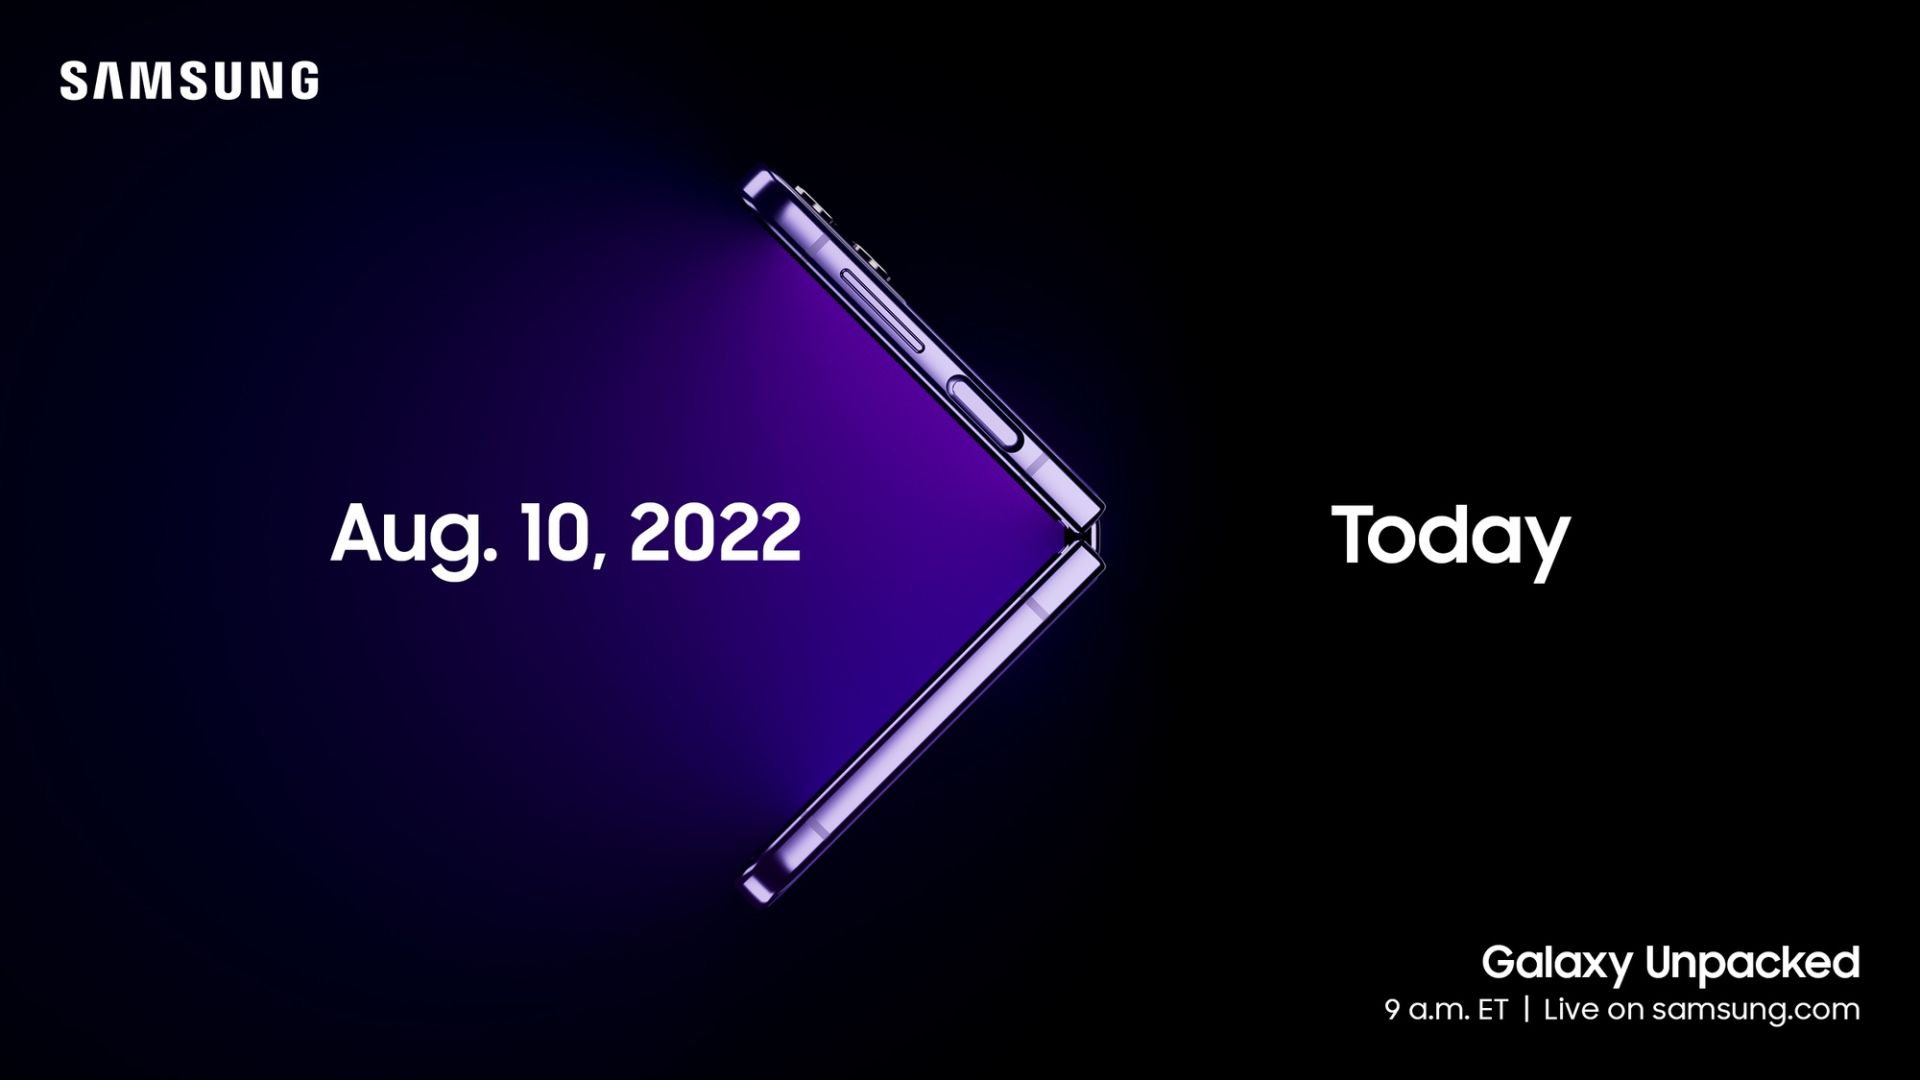 Samsung Galaxy Unpacked Event Poster